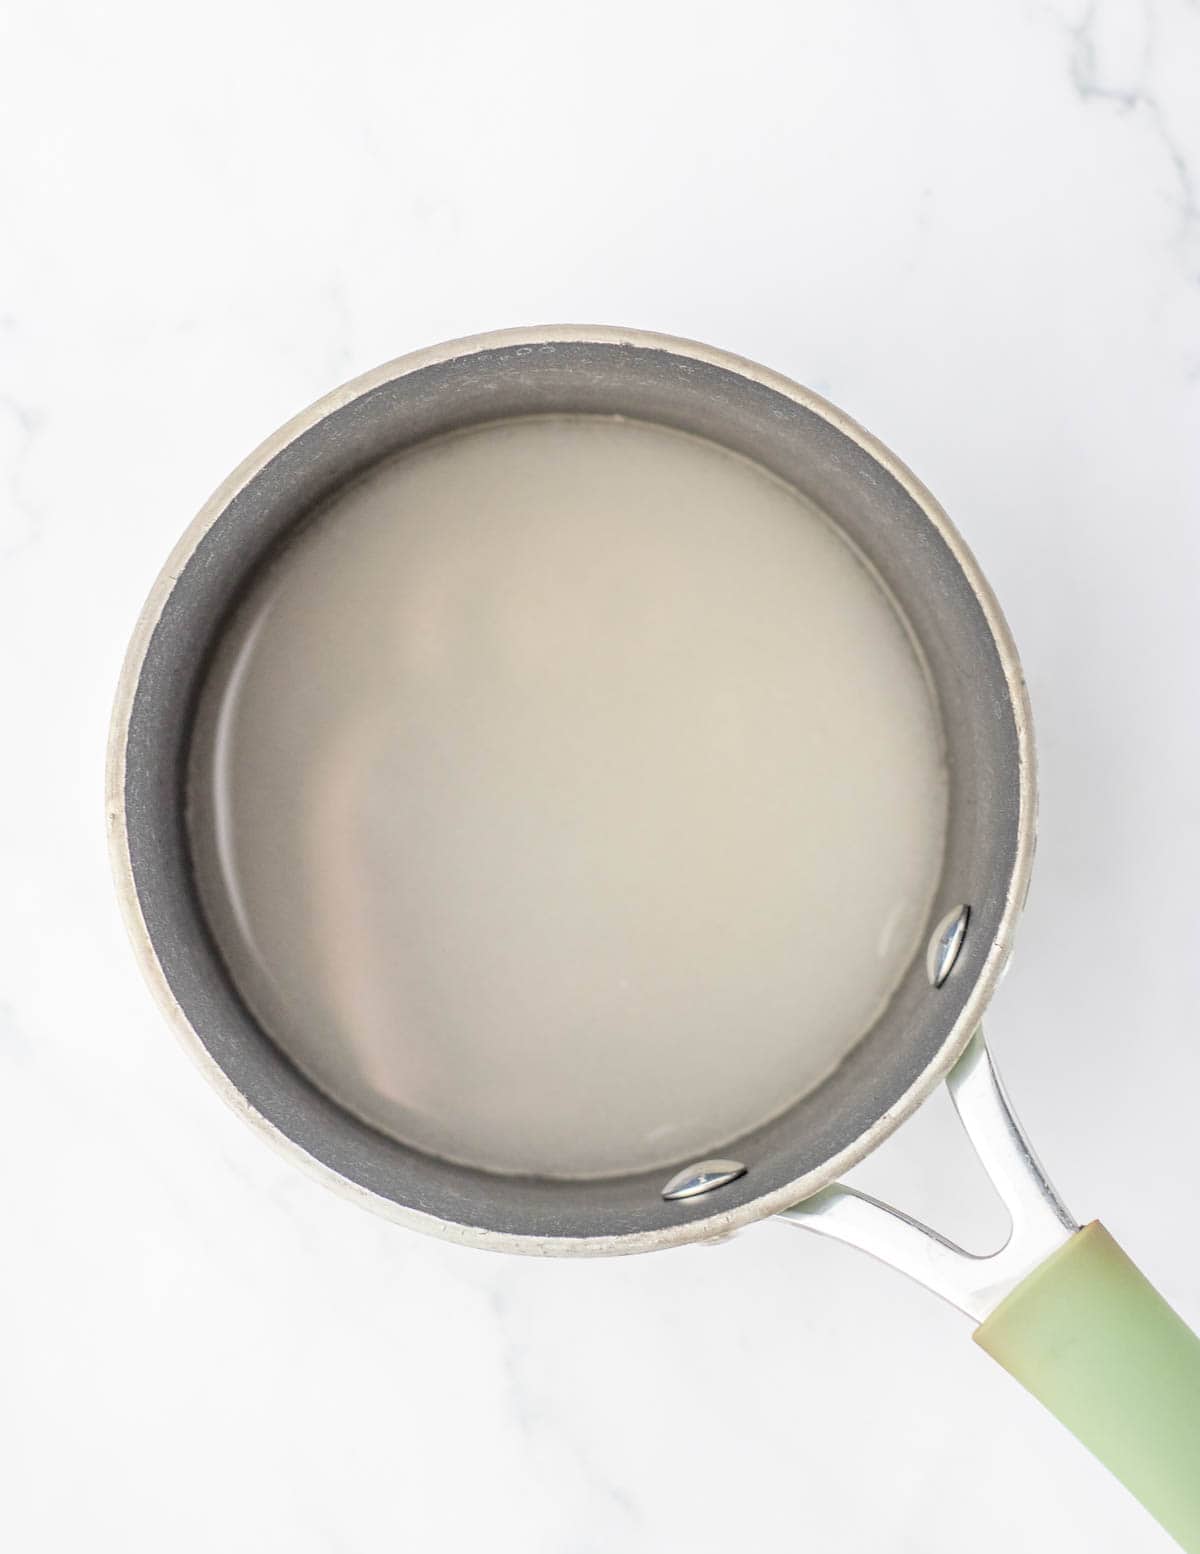 A sauce pan with sugar and water in it.